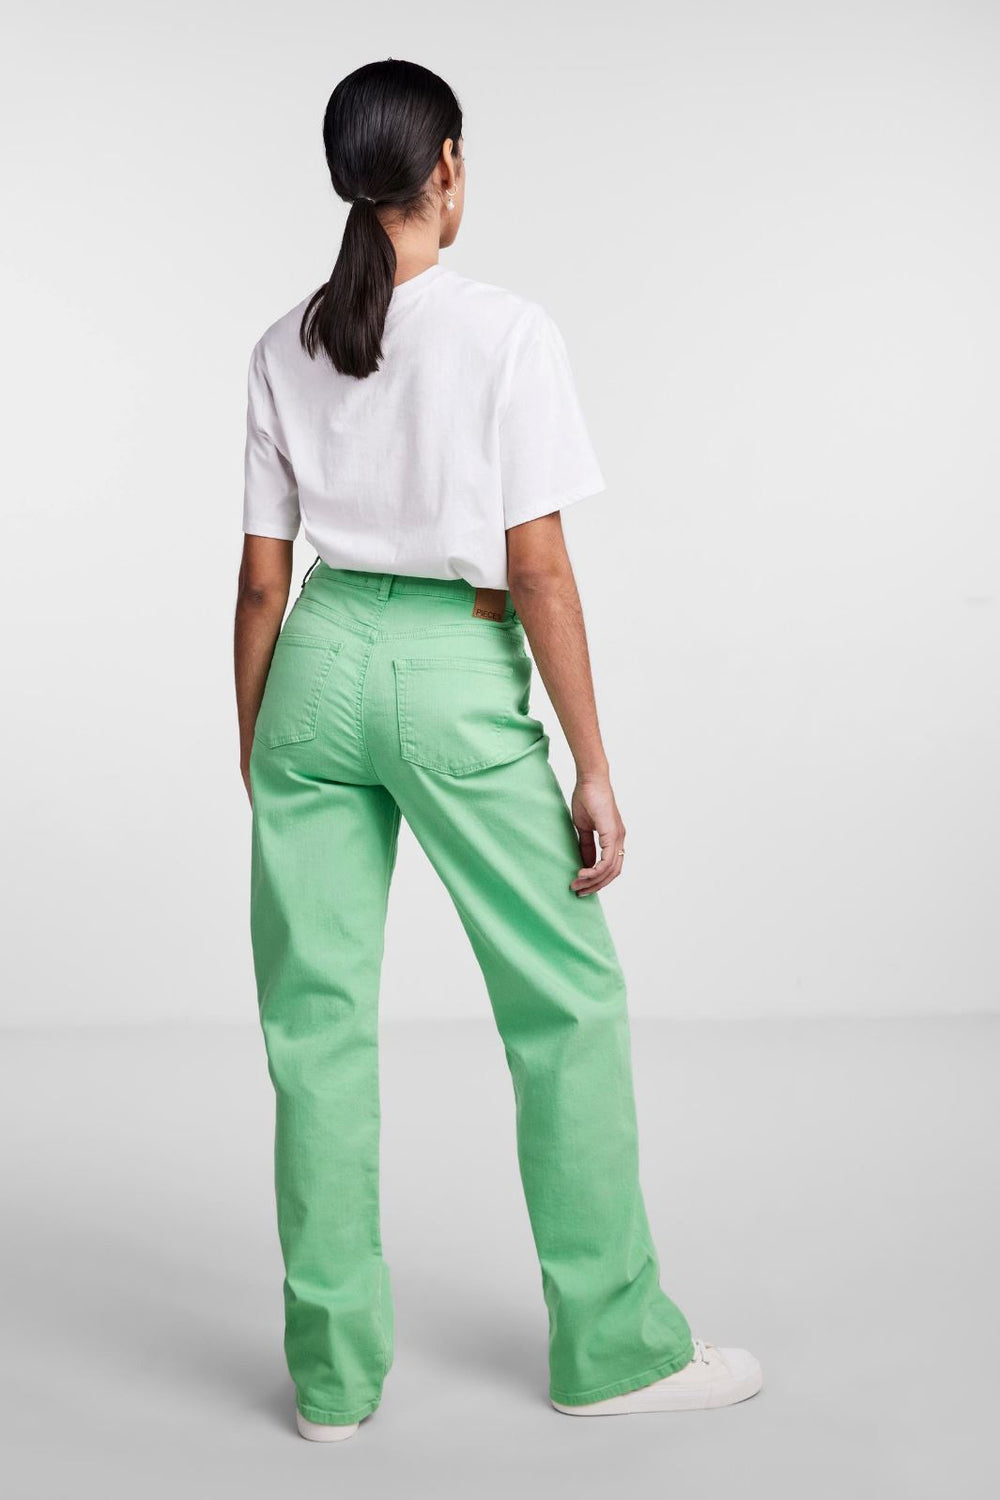 Pieces - Pcholly Hw Wide Jeans - Absinthe Green Bukser 